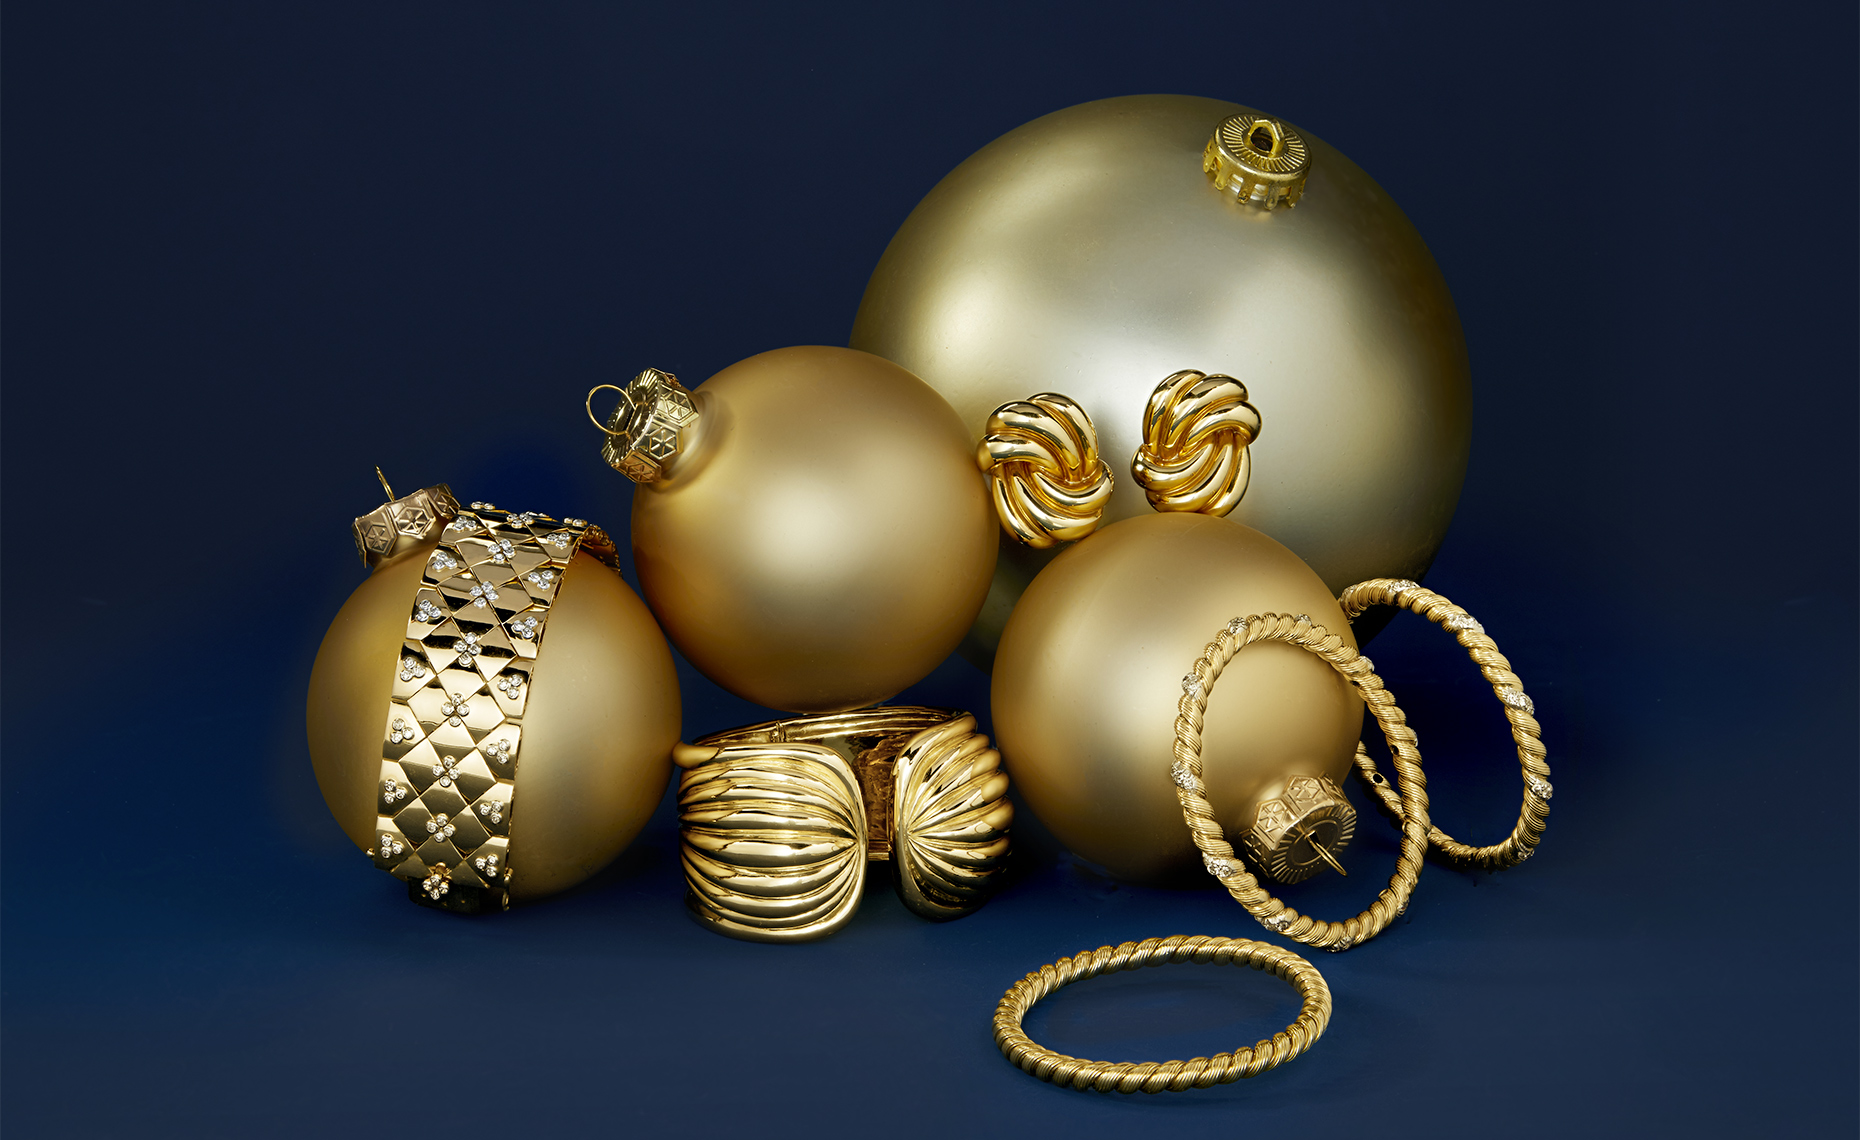 A holiday still life of collectable high gold jewelry by still life photographer David Lewis Taylor.DavidLewisTaylor_Photography0556